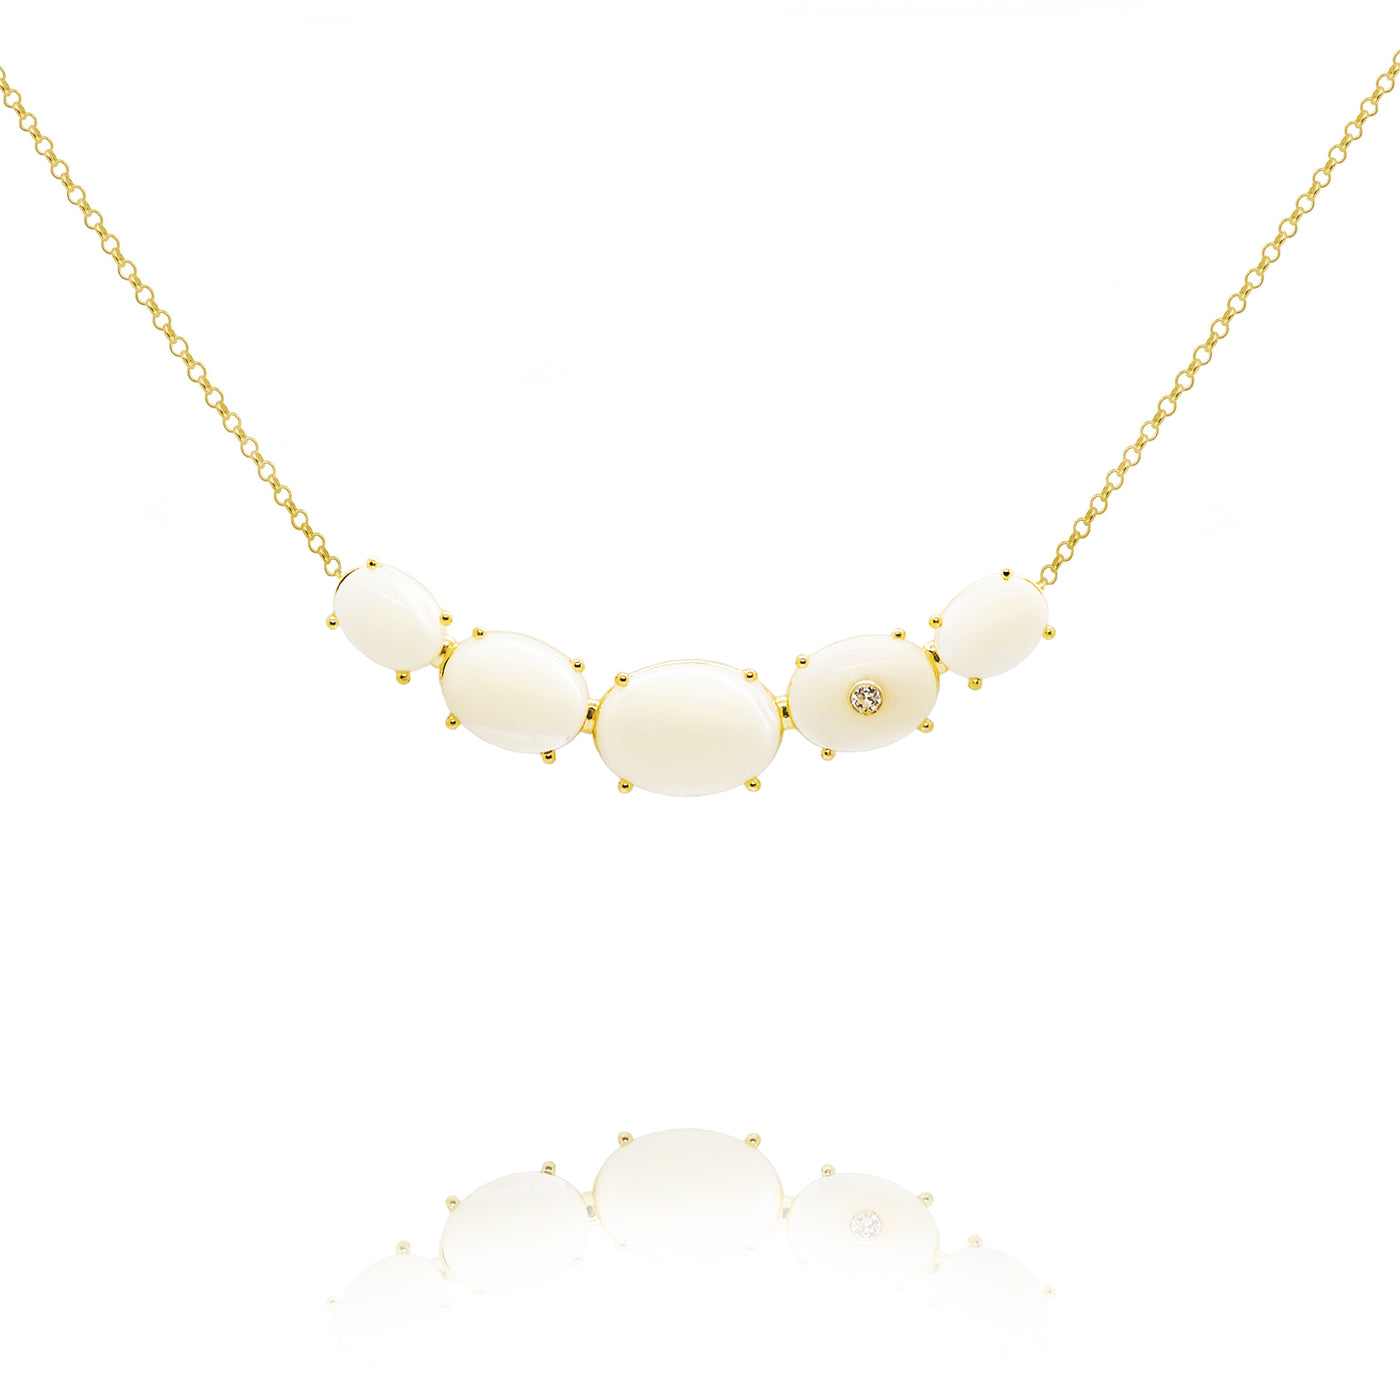 fine jewelry necklace in gold with mother of pearl and white sapphire gemstones from Atelier ORMAN